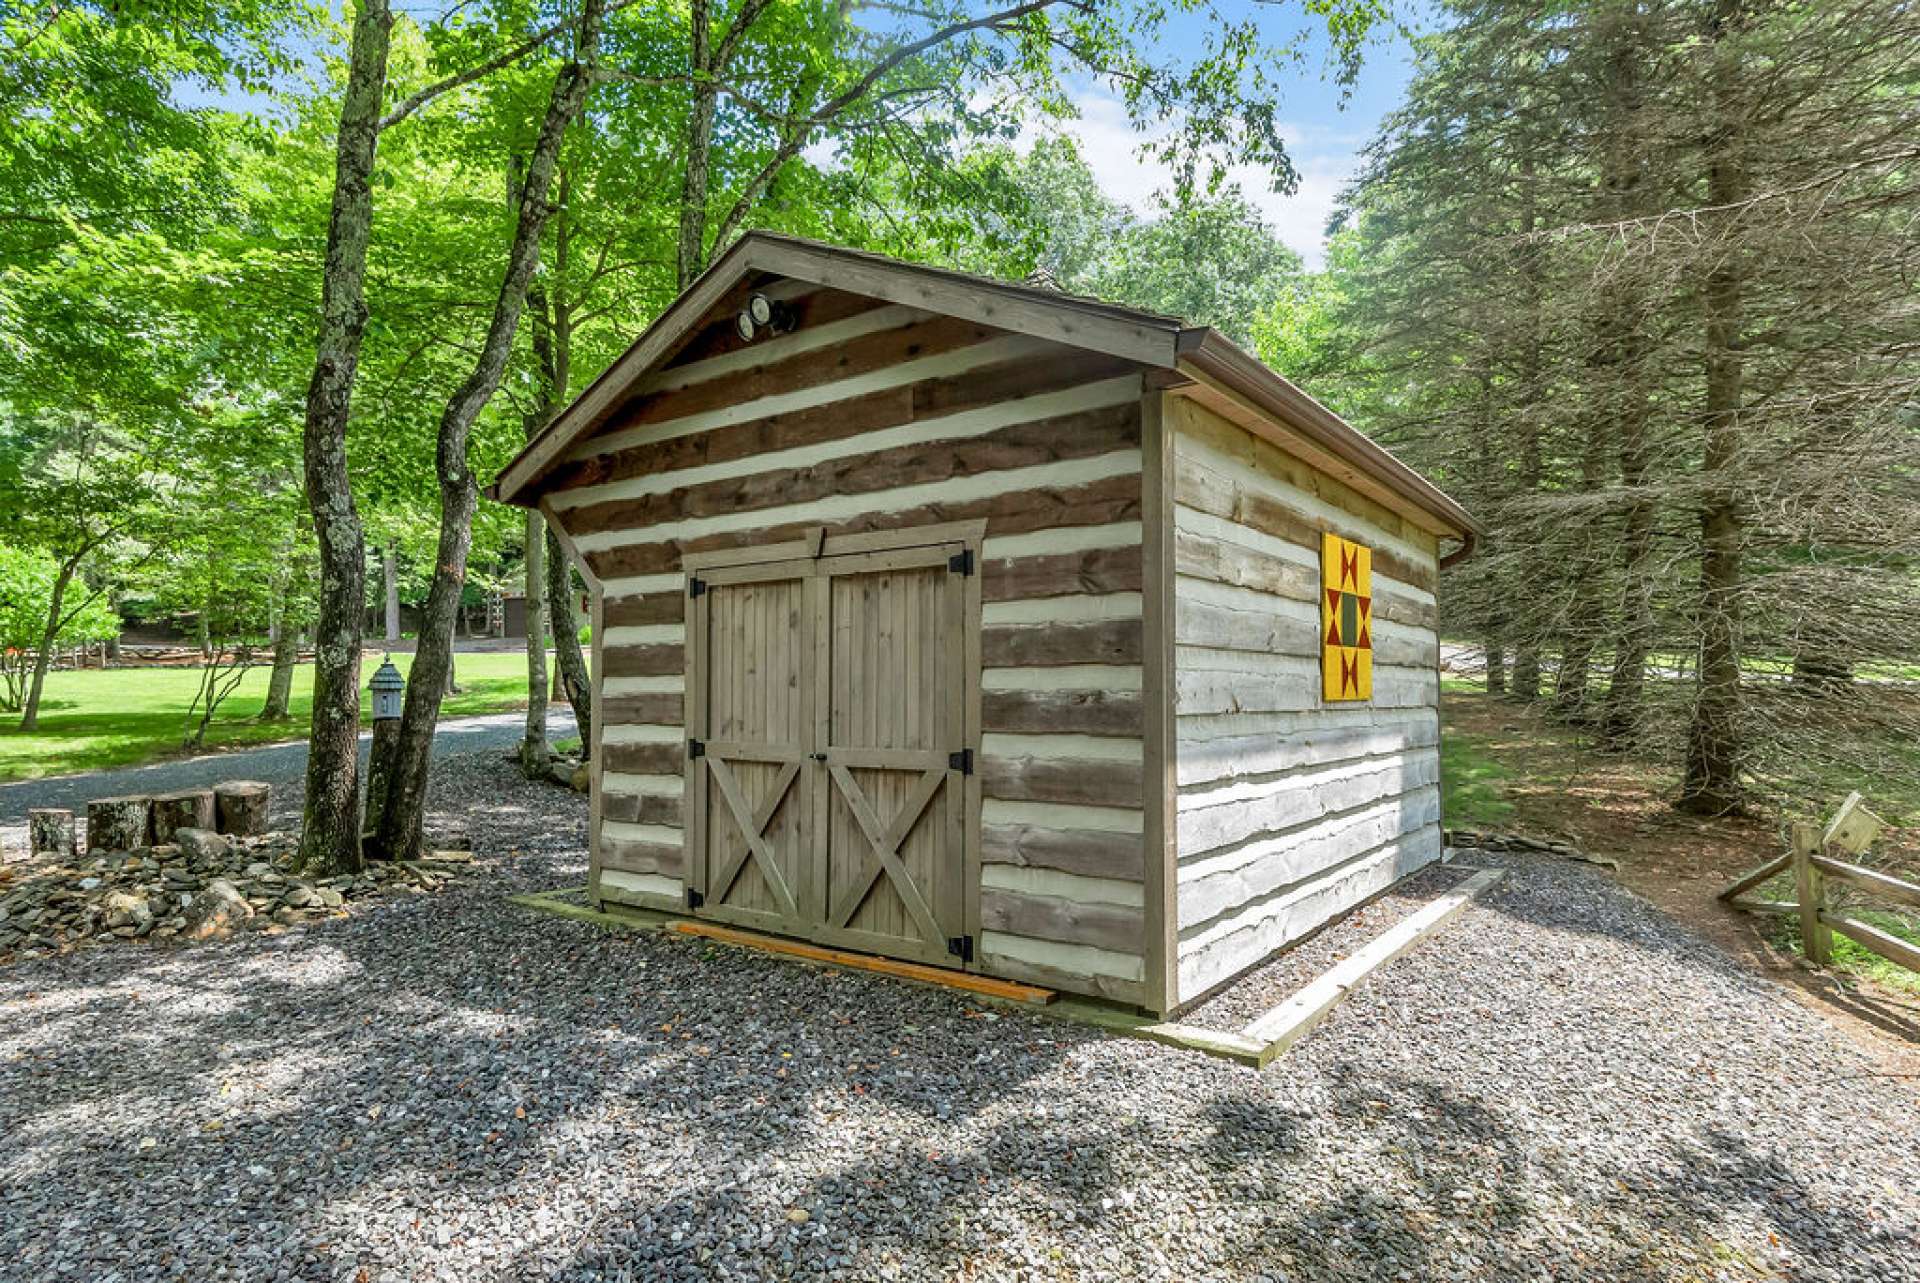 The Weaver Barn is great for storage or a gardening shed.